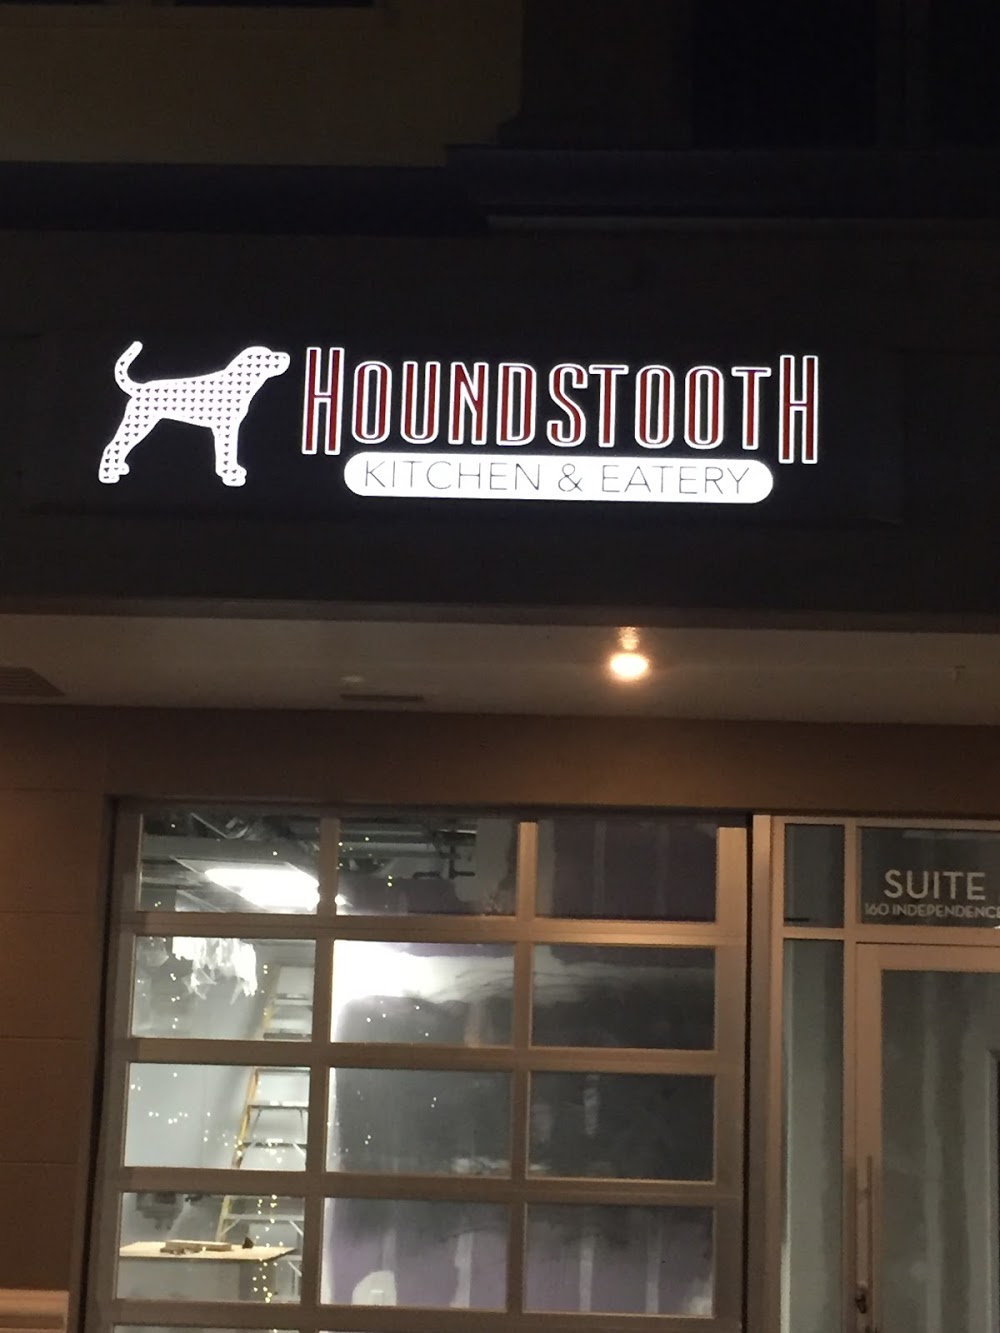 Houndstooth Kitchen & Eatery